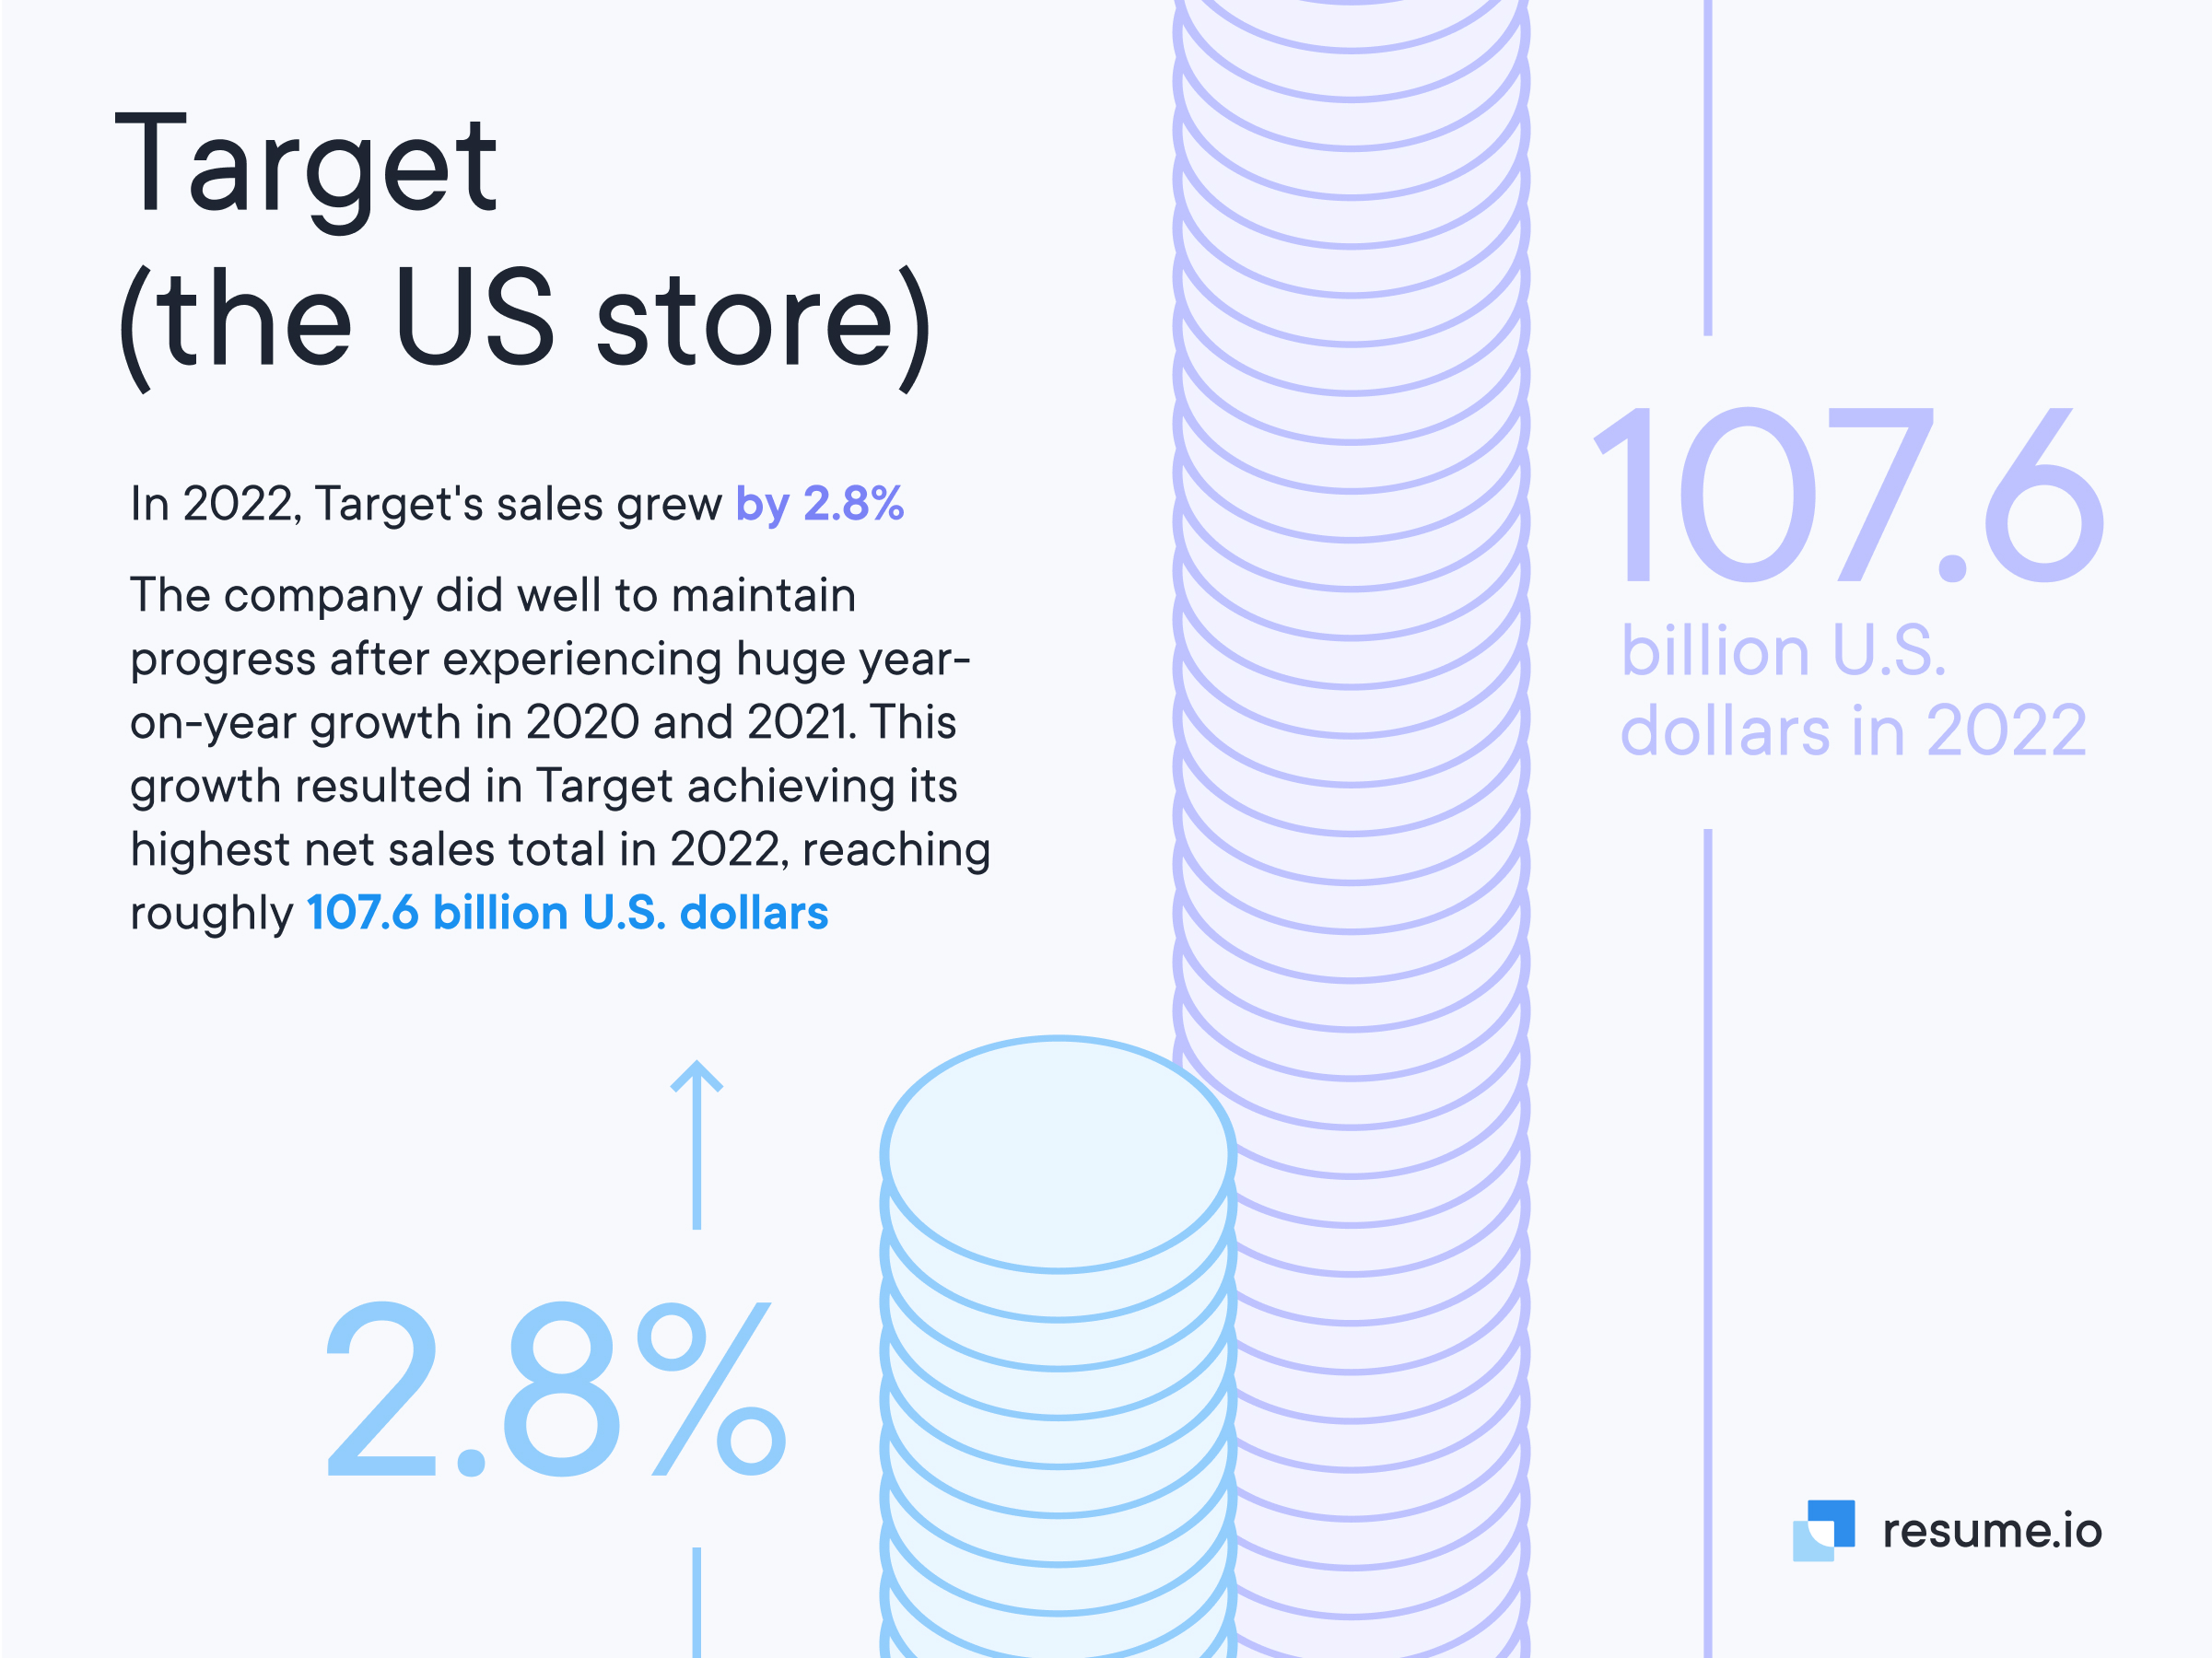 Financial facts about Target (the US store)